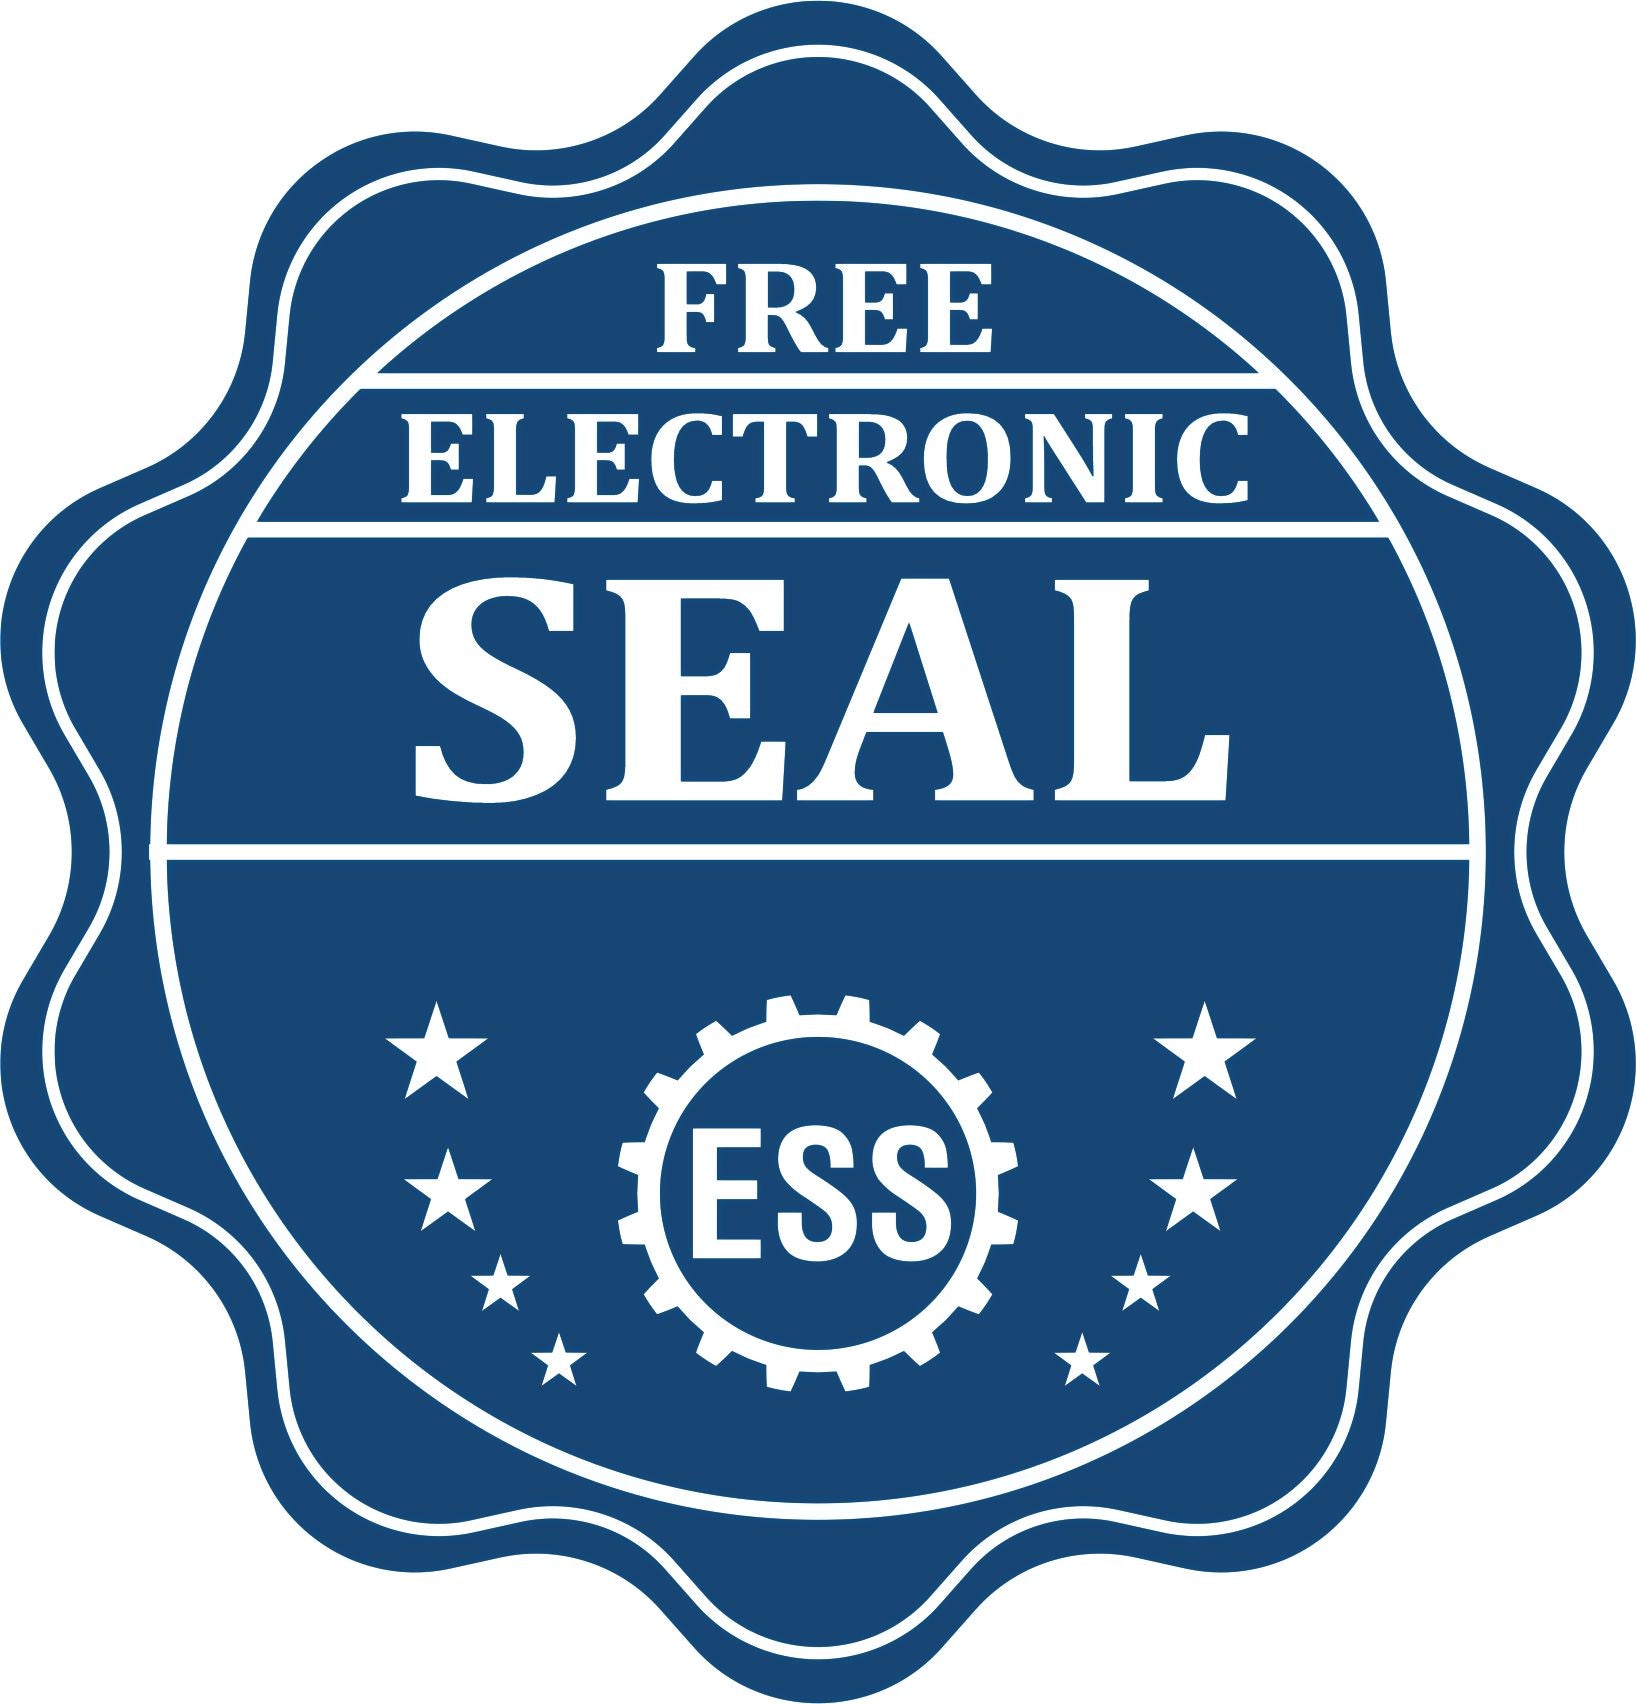 A badge showing a free electronic seal for the Handheld Colorado Professional Engineer Embosser with stars and the ESS gear on the emblem.